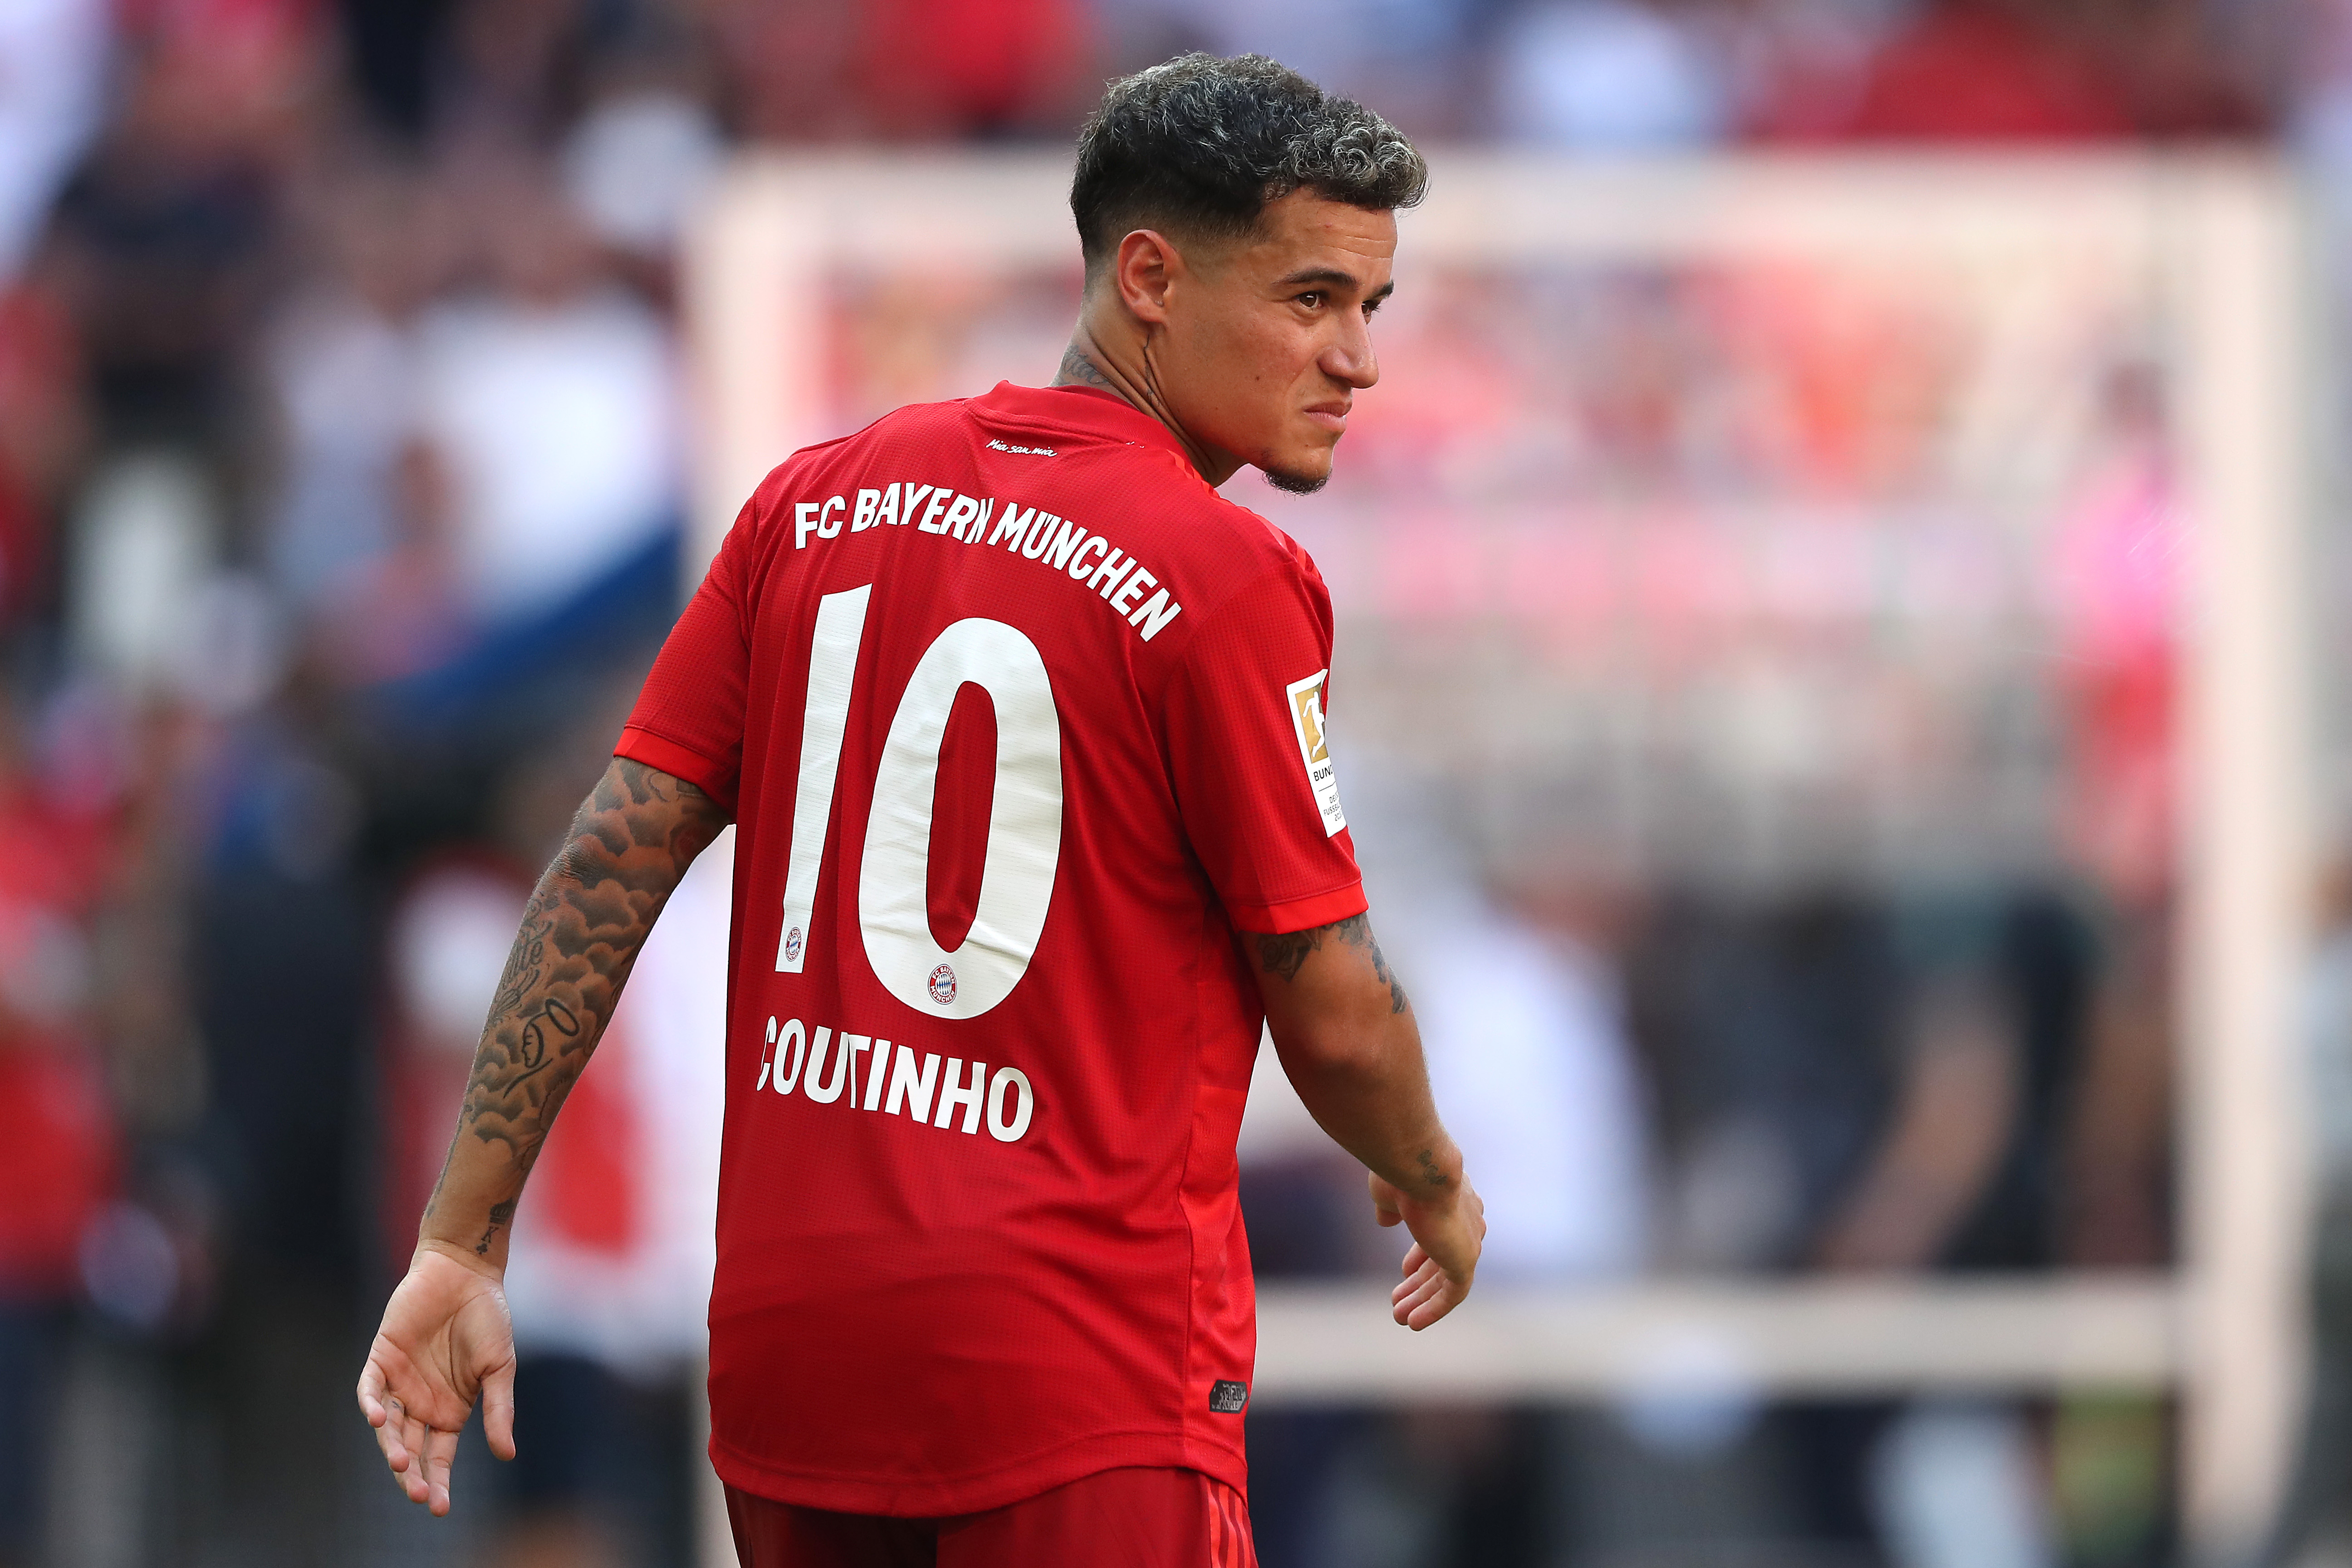 Coutinho likely to miss out on Sunday (Photo by Alexander Hassenstein/Bongarts/Getty Images)